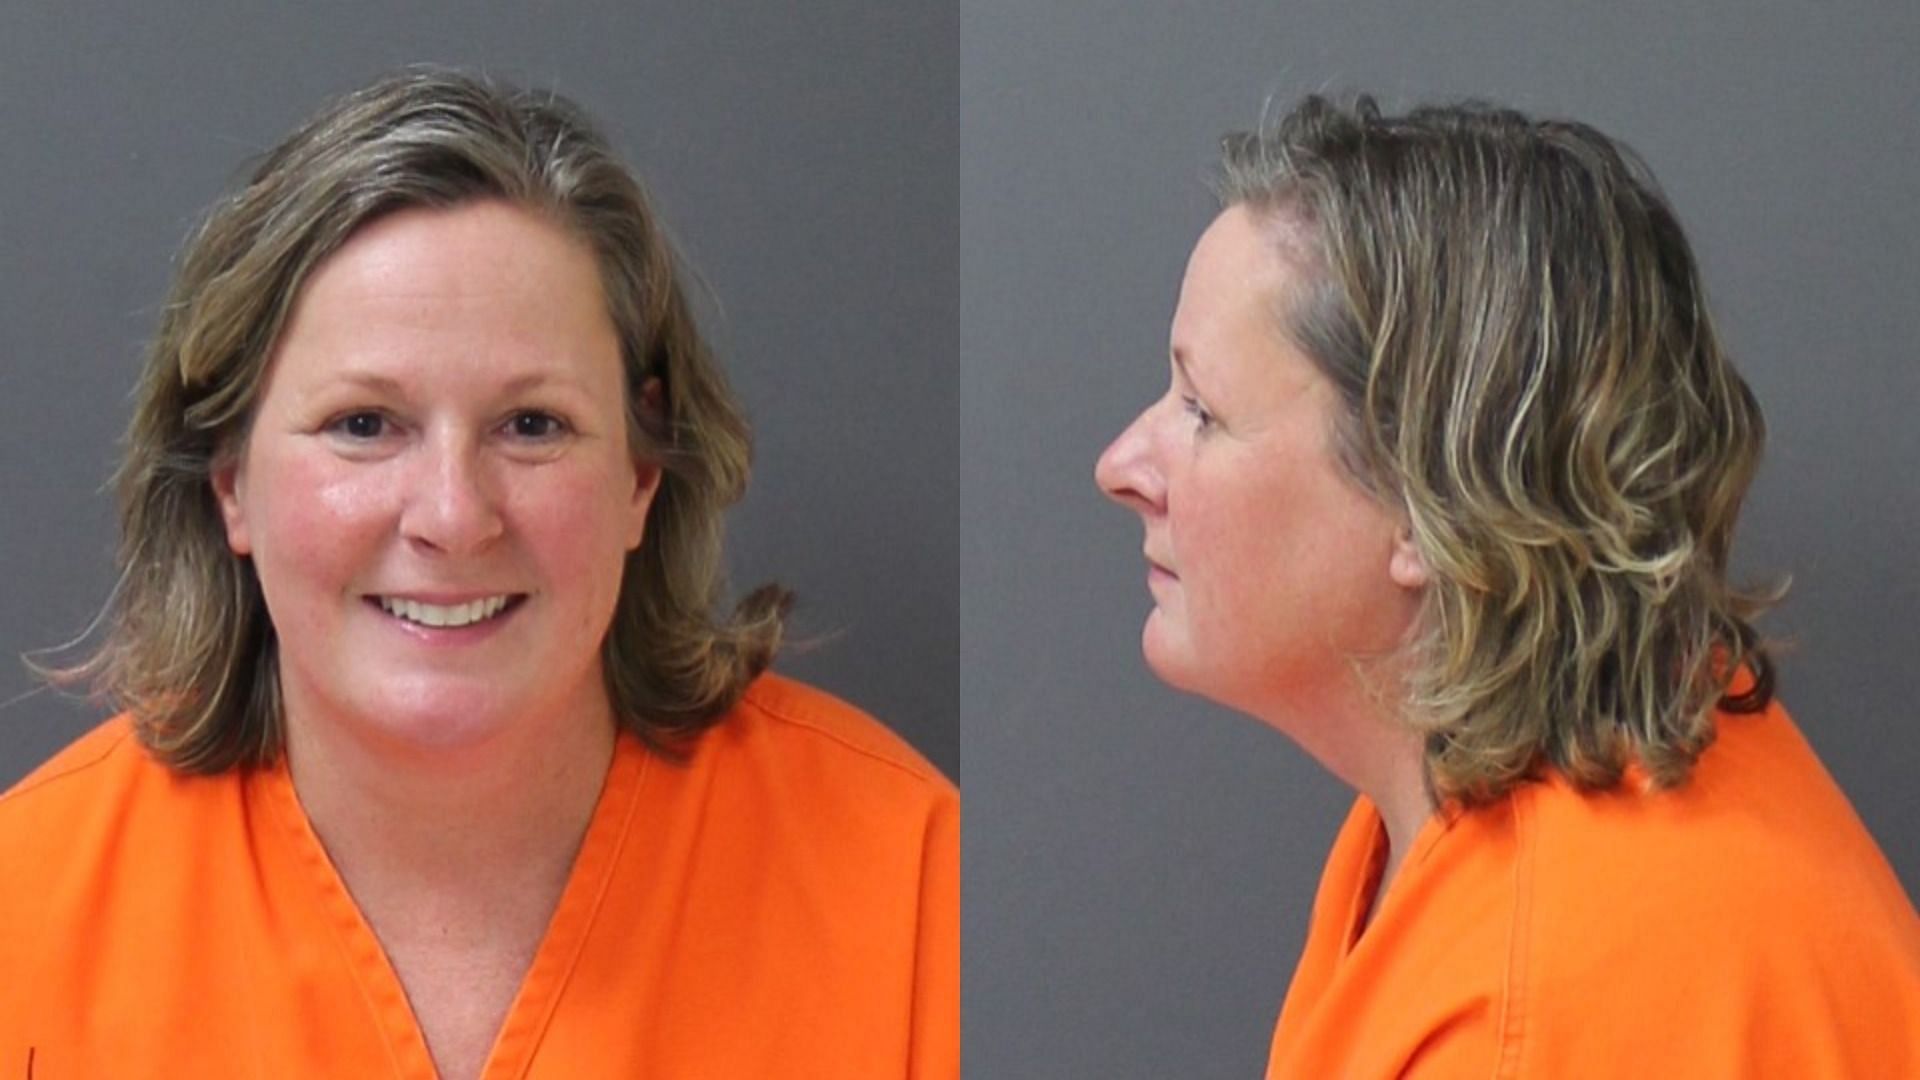 Former police officer Kim Potter was seen smiling in her mugshot after being declared guilty of manslaughter for the fatal shooting of Daunte Wright (Image via Minnesota Correctional Facility)